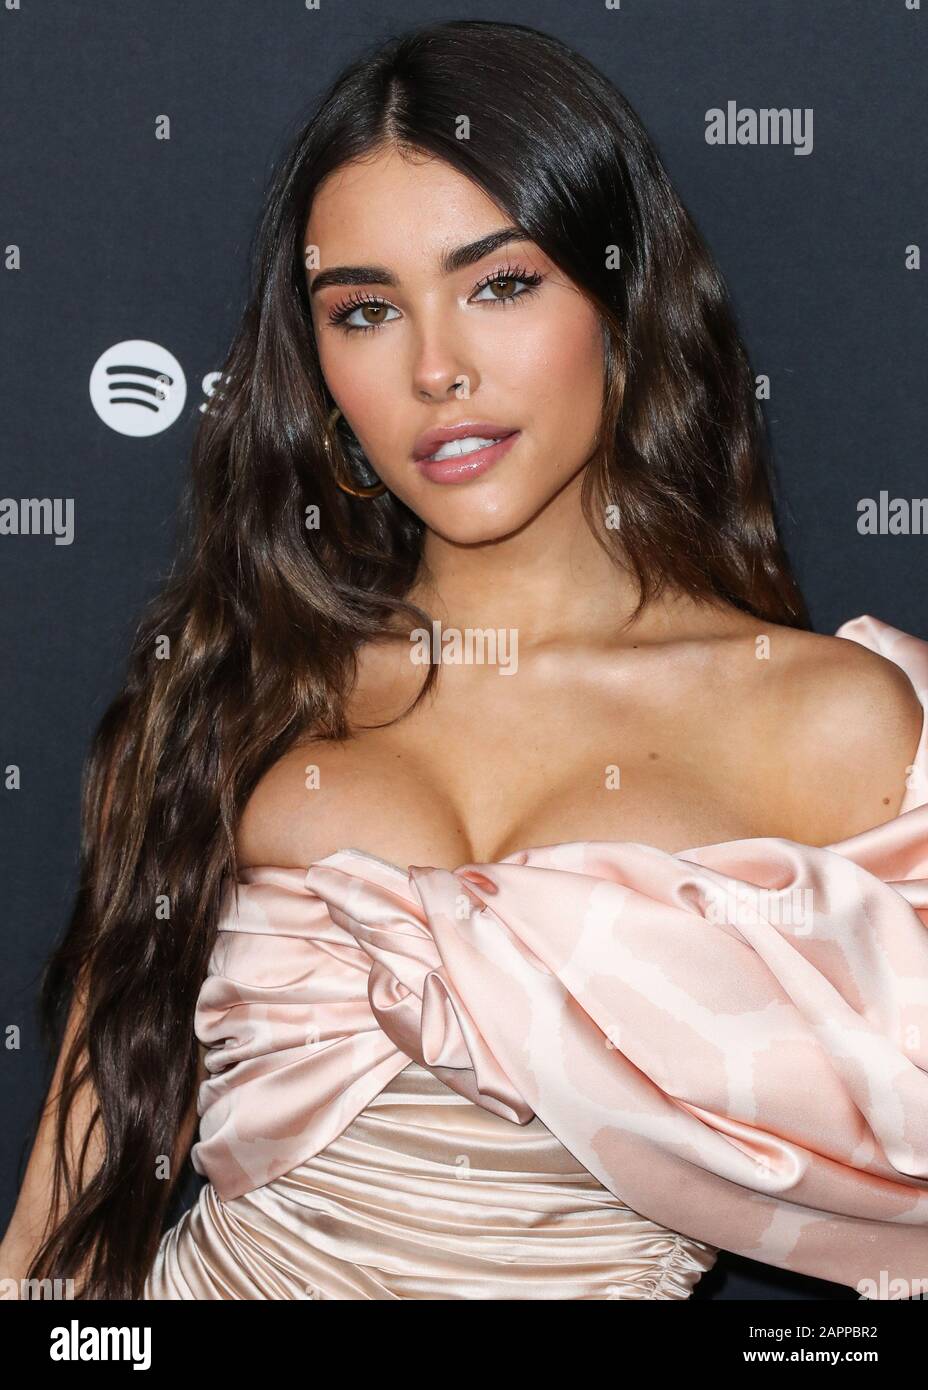 Image about madison beer in 𝘮𝘢𝘥𝘪𝘴𝘰𝘯 𝘣𝘦𝘦𝘳 . by 𝙡𝙚𝙭